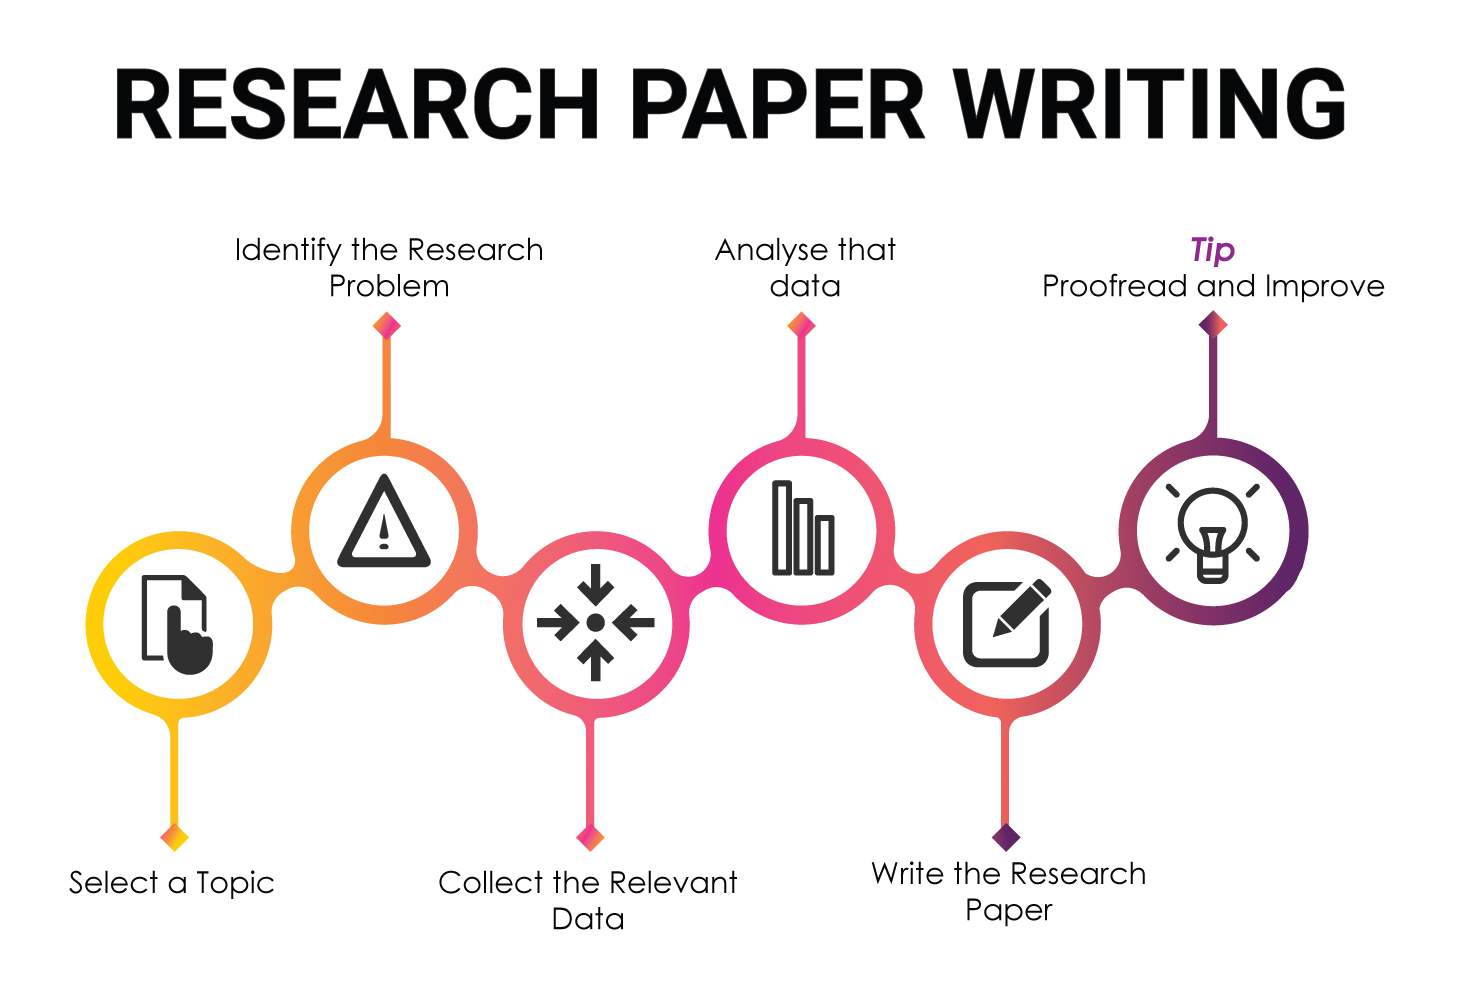 journal of writing research